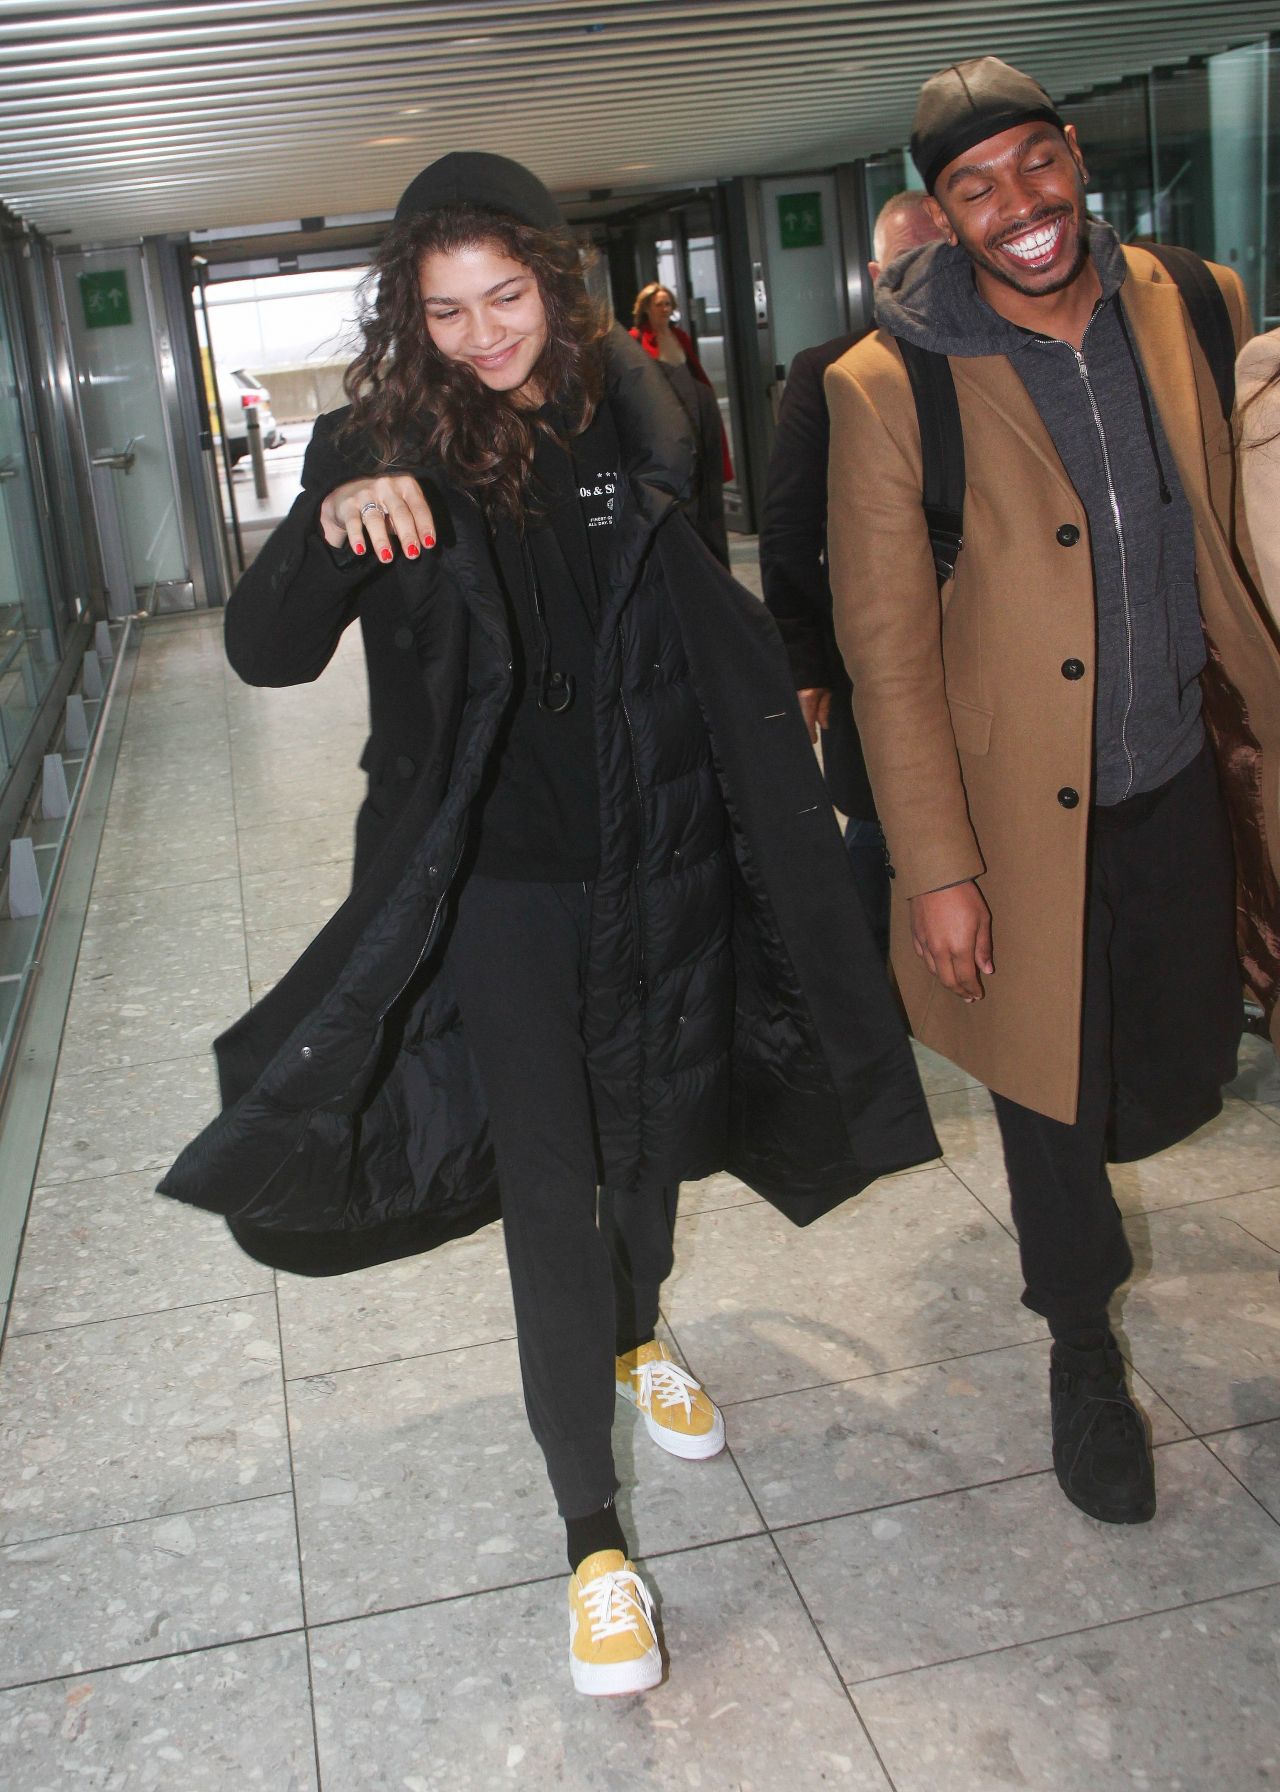 Zendaya Coleman looks tired as she arrives at Heathrow airport to fly out  of London